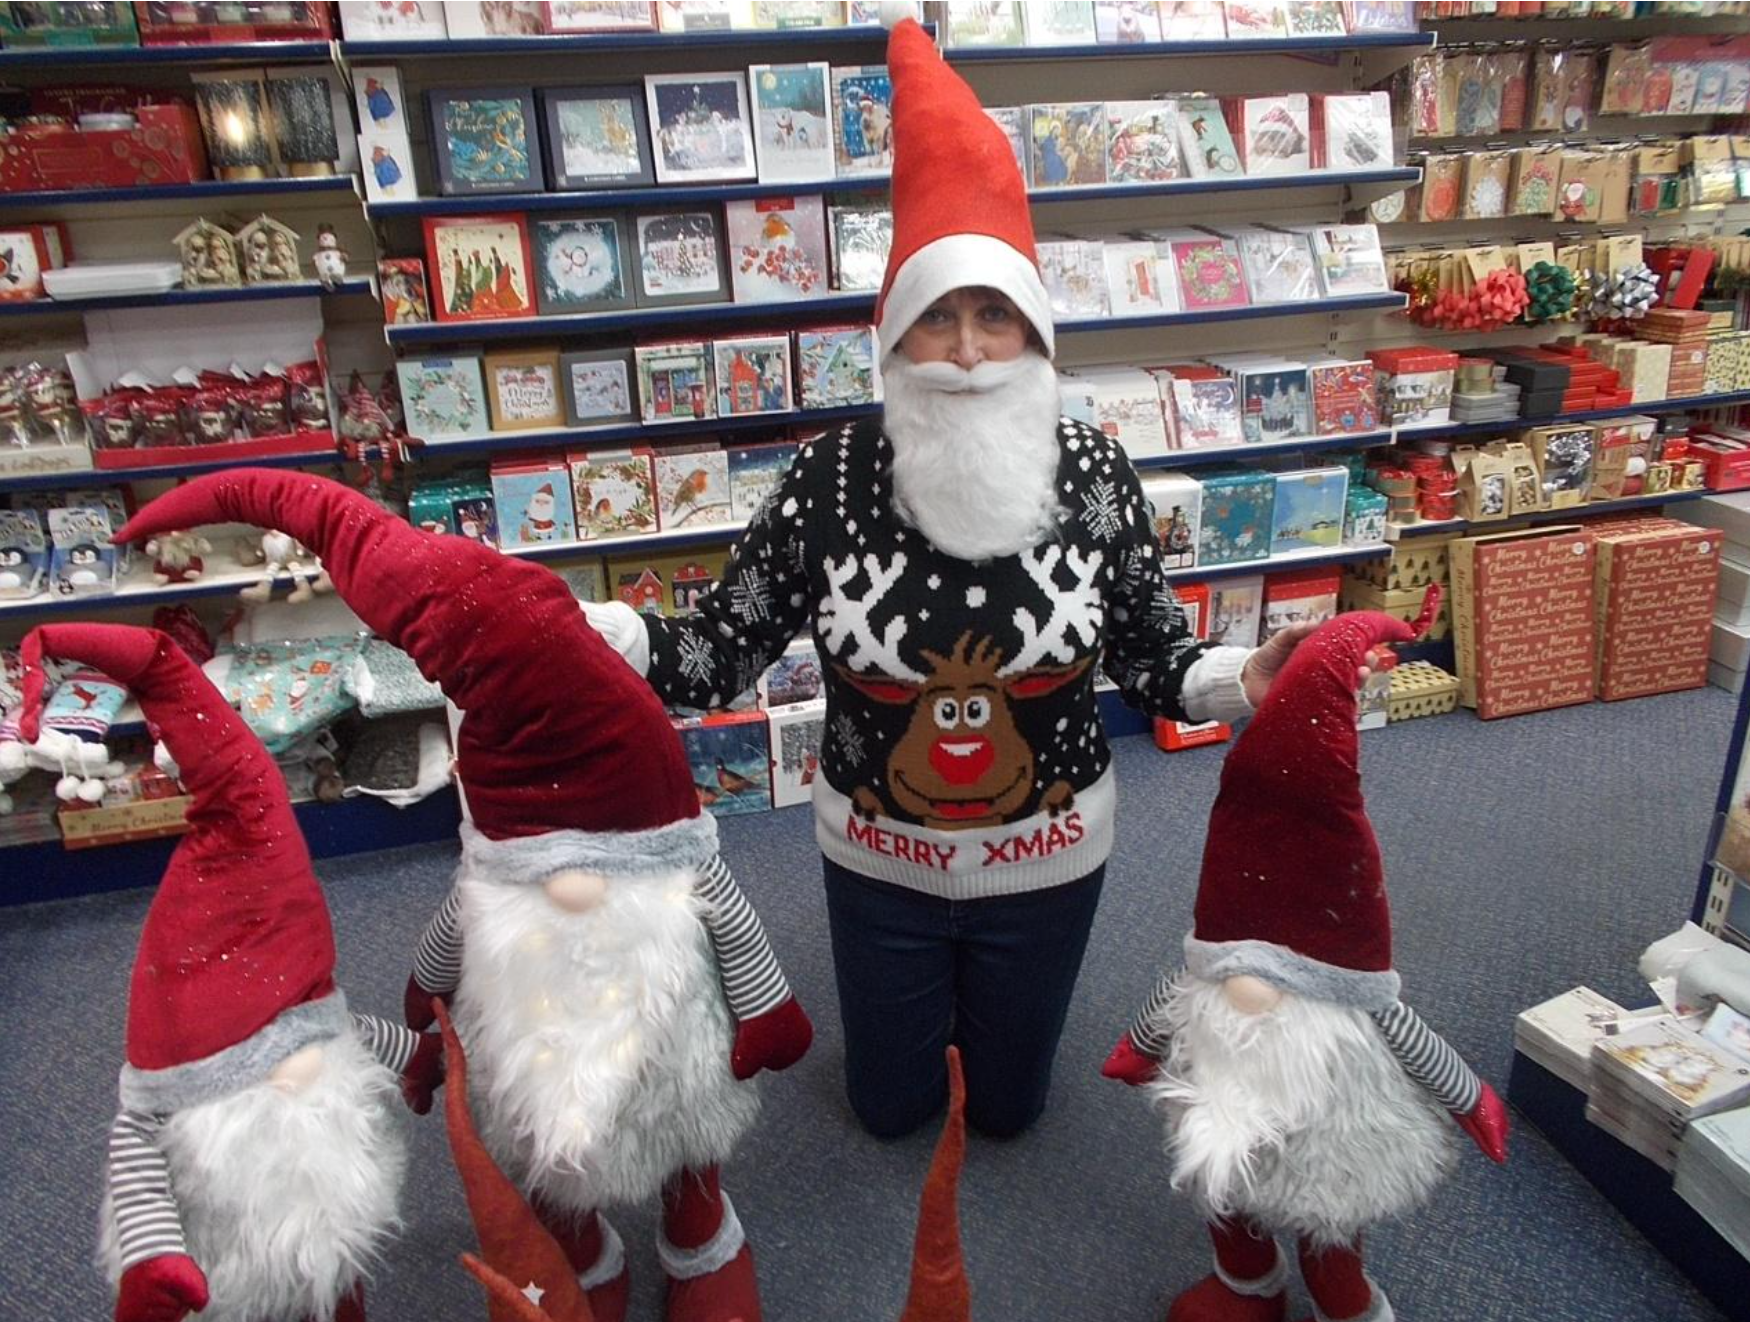 Above: Festive fun in House of Cards’ Kidlington branch.